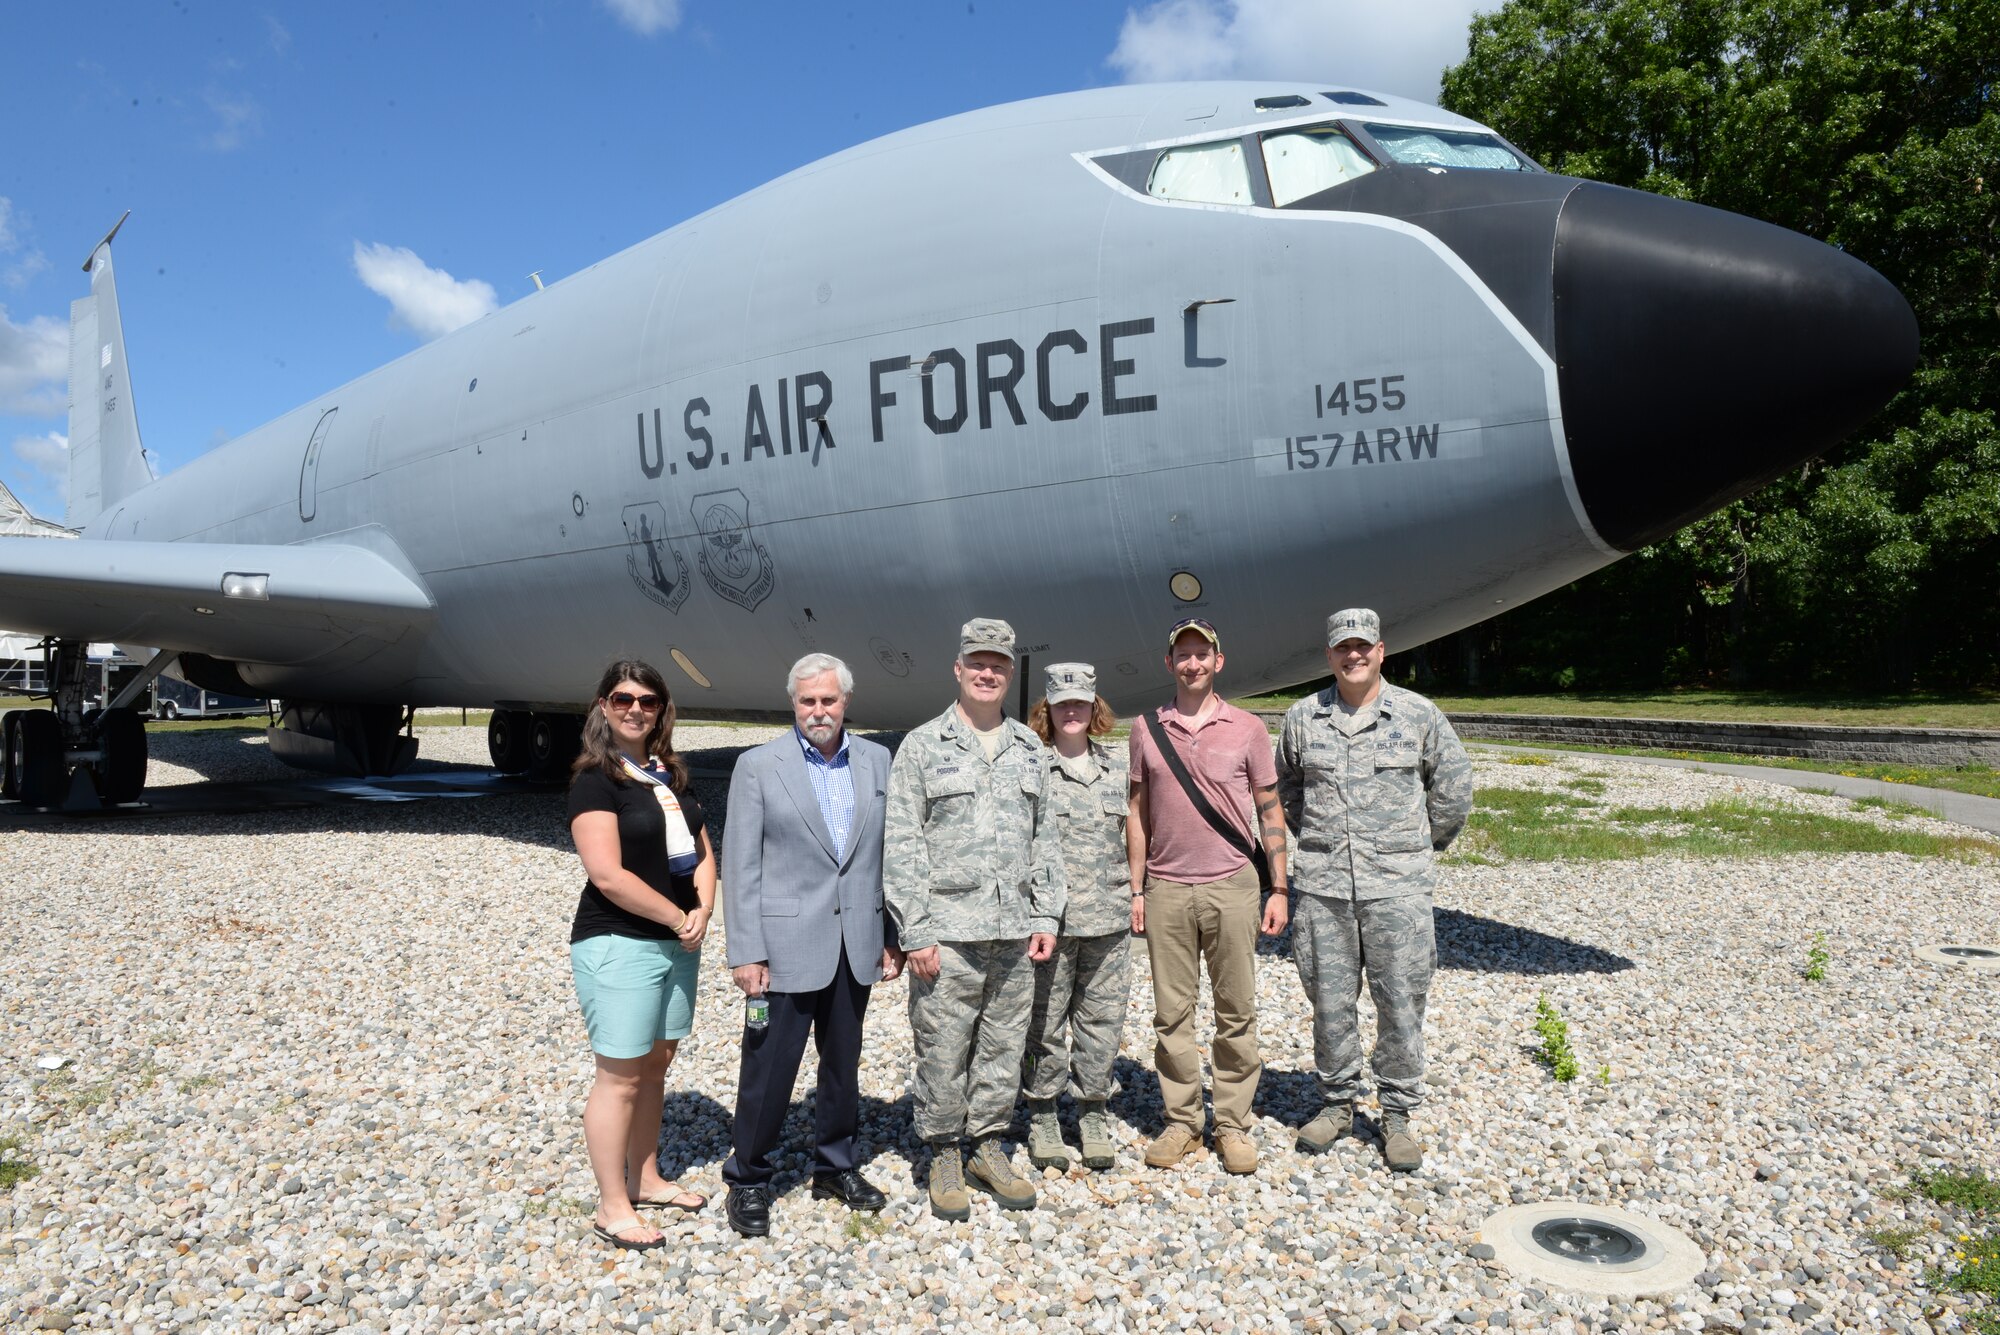 U.S. Air Force Col. John W. Pogorek, Left,  157th Air Refueling Wing commander, Capt. Megan C. Martin, Nurse, 157th Medical Group, Capt. Michael G. Petrin, 157th ARW executive officer, pose for a group photo with civic leaders Rebecca Perkins and Josh Denton, both Portsmouth City councilors, and Joseph Lovejoy, vice chair, Stratham Board of Selectmen. The civic leaders visited Pease to understand the mission of the 157th ARW, June 29, 2018.  (N.H. Air National Guard Photo by Master Sgt. Thomas Johnson)